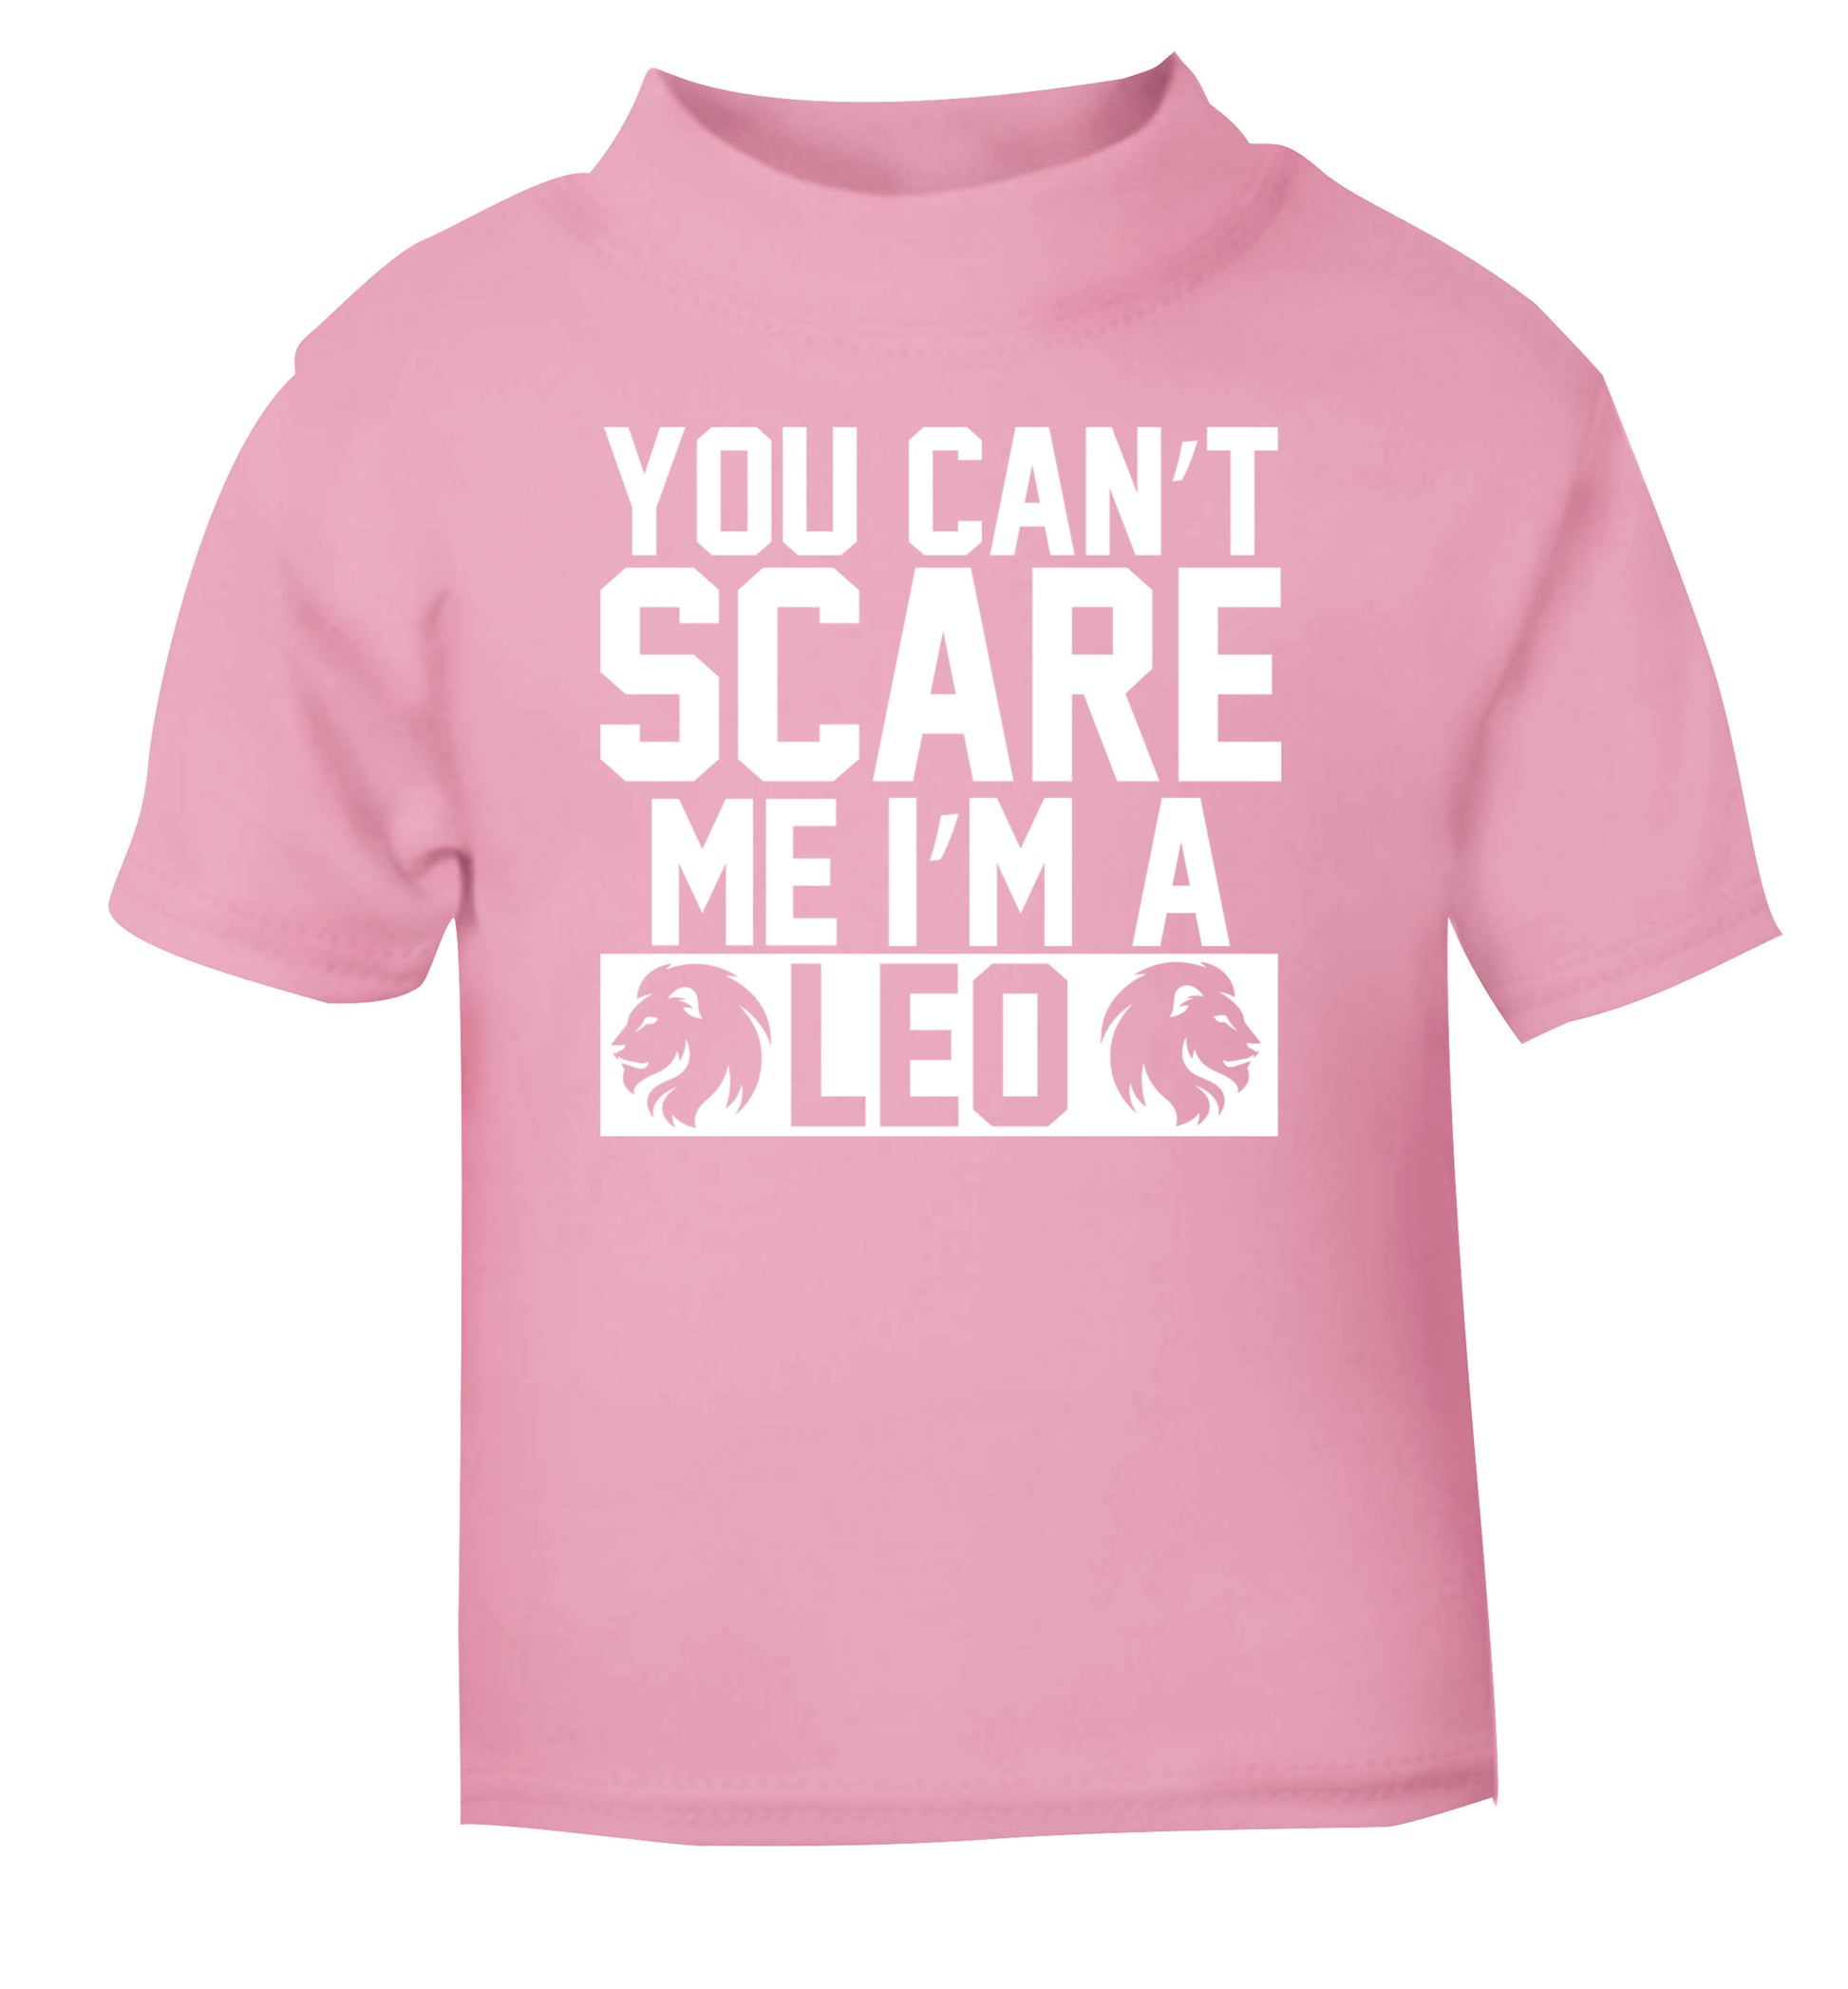 You can't scare me I'm a leo light pink Baby Toddler Tshirt 2 Years